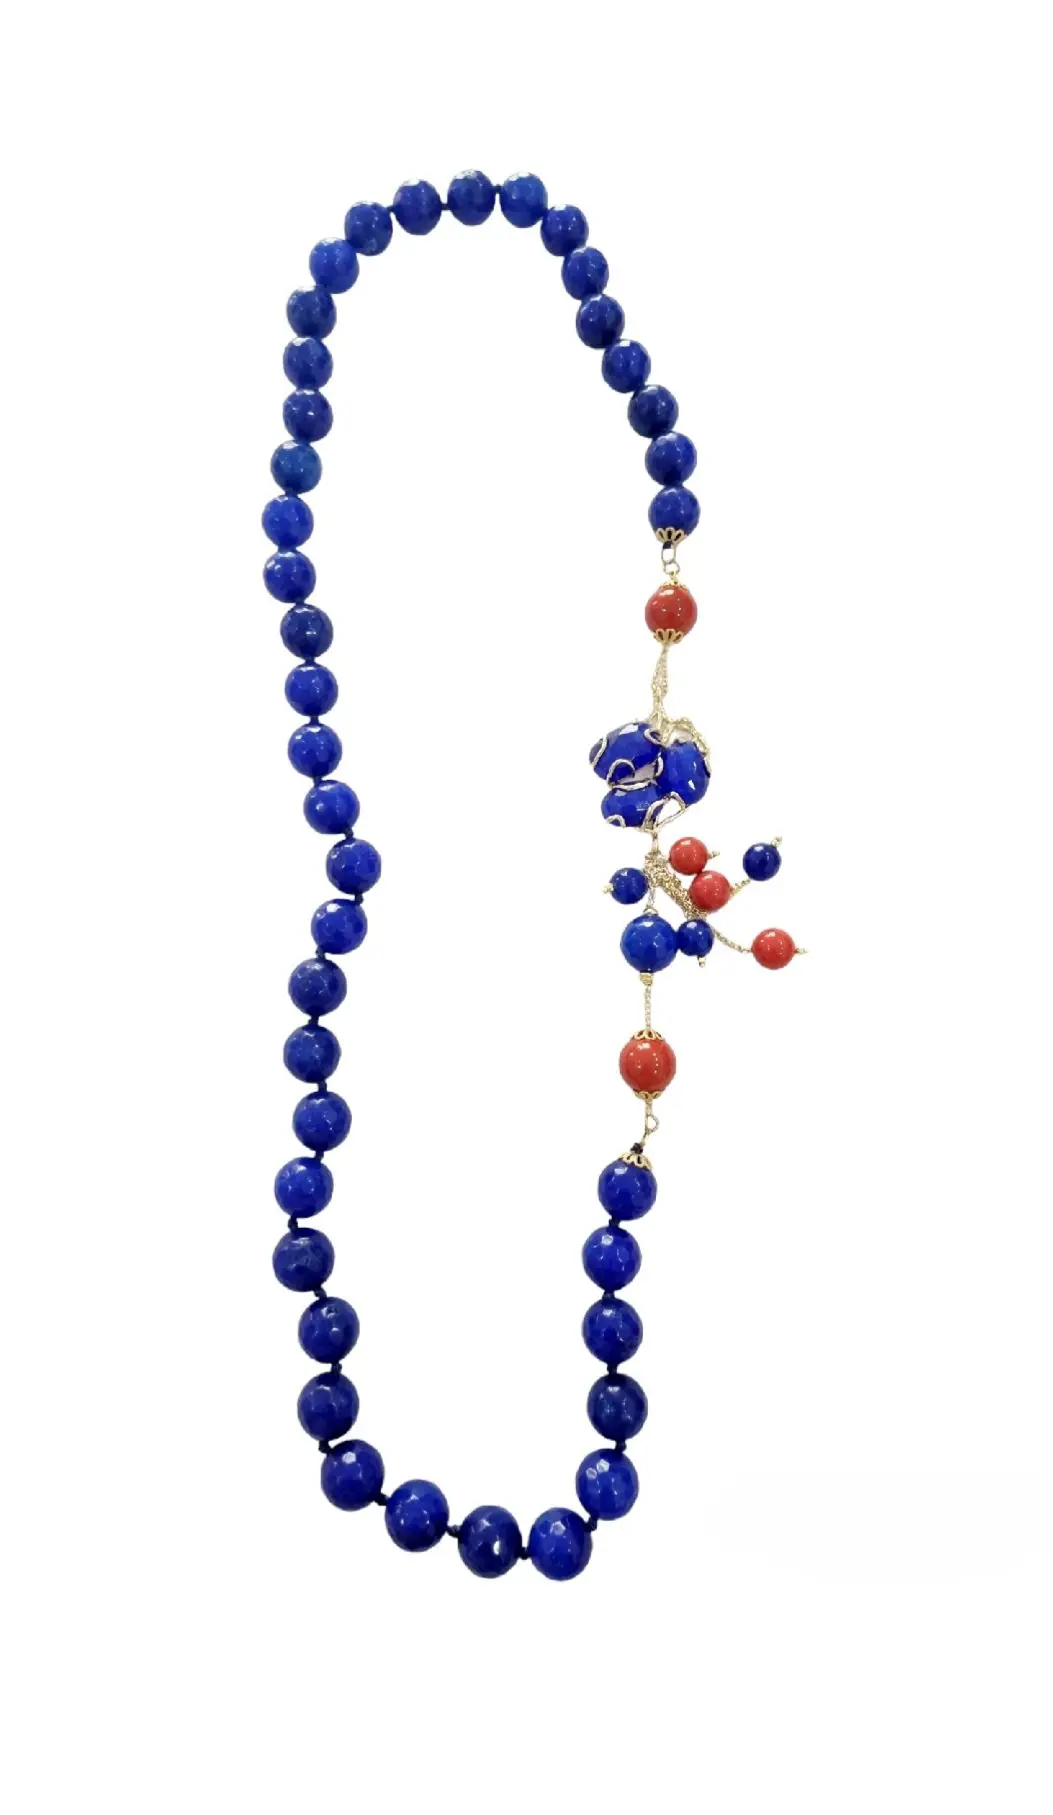 Necklace made with electric blue agate and coral paste, cat's eye on the side mounted on brass. Length 78cm